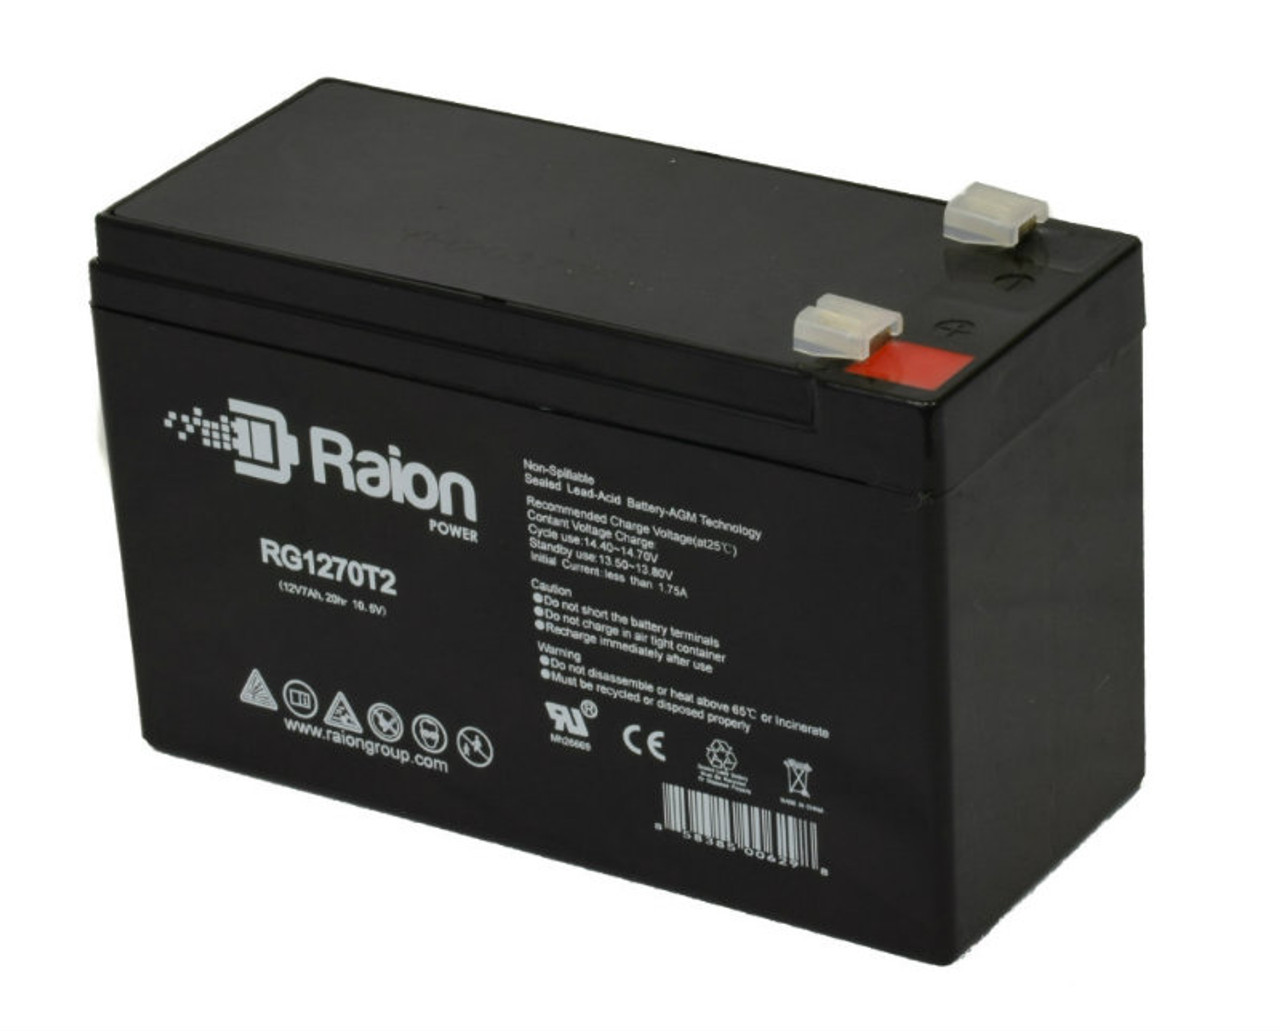 Raion Power RG1270T1 12V 7Ah Non-Spillable Replacement Battery for Ocean NP7-12 F1